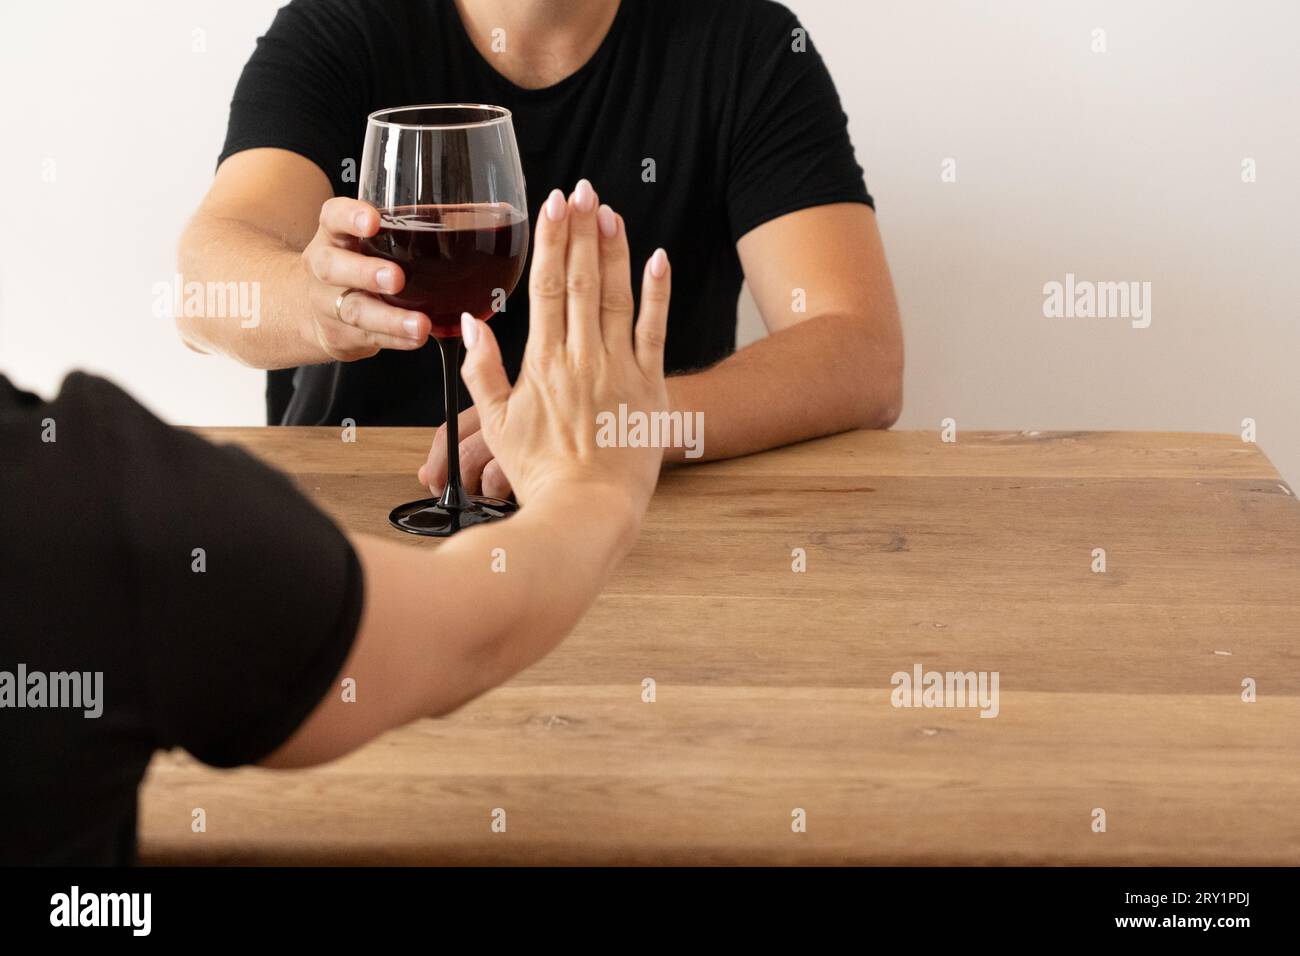 Empowered Woman Declining Alcohol: NOLO, Abstinence, Confronting Alcohol Issues, Saying No to Drinks at Social Gatherings, Substance-Free Lifestyle Stock Photo